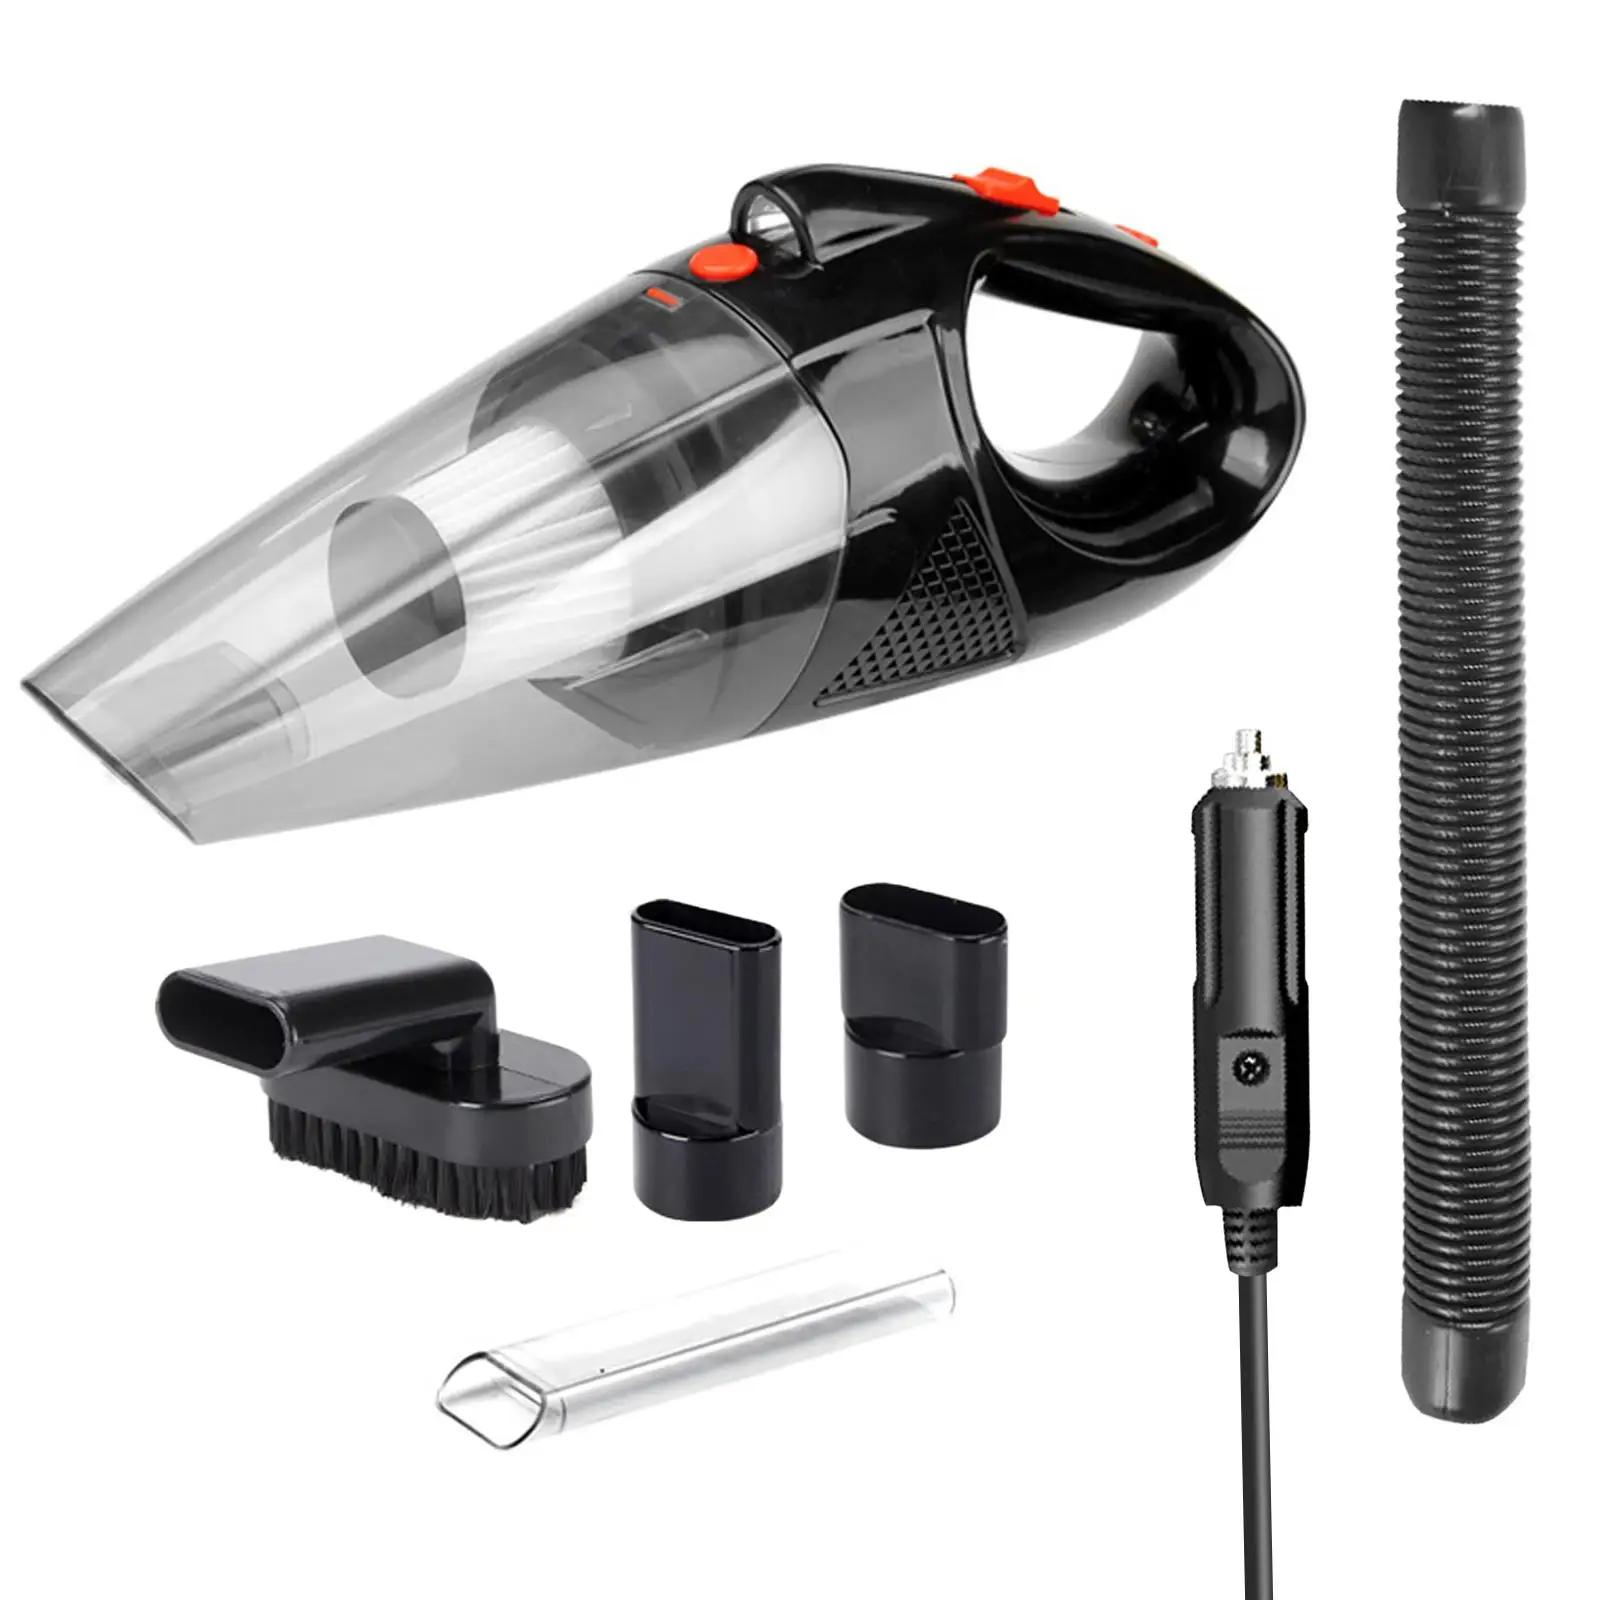 Portable Car Vacuum Cleaner 12V Lightweight Interior Detailing Kit Auto Accessories with LED Lighting with 5 Attachments Mini